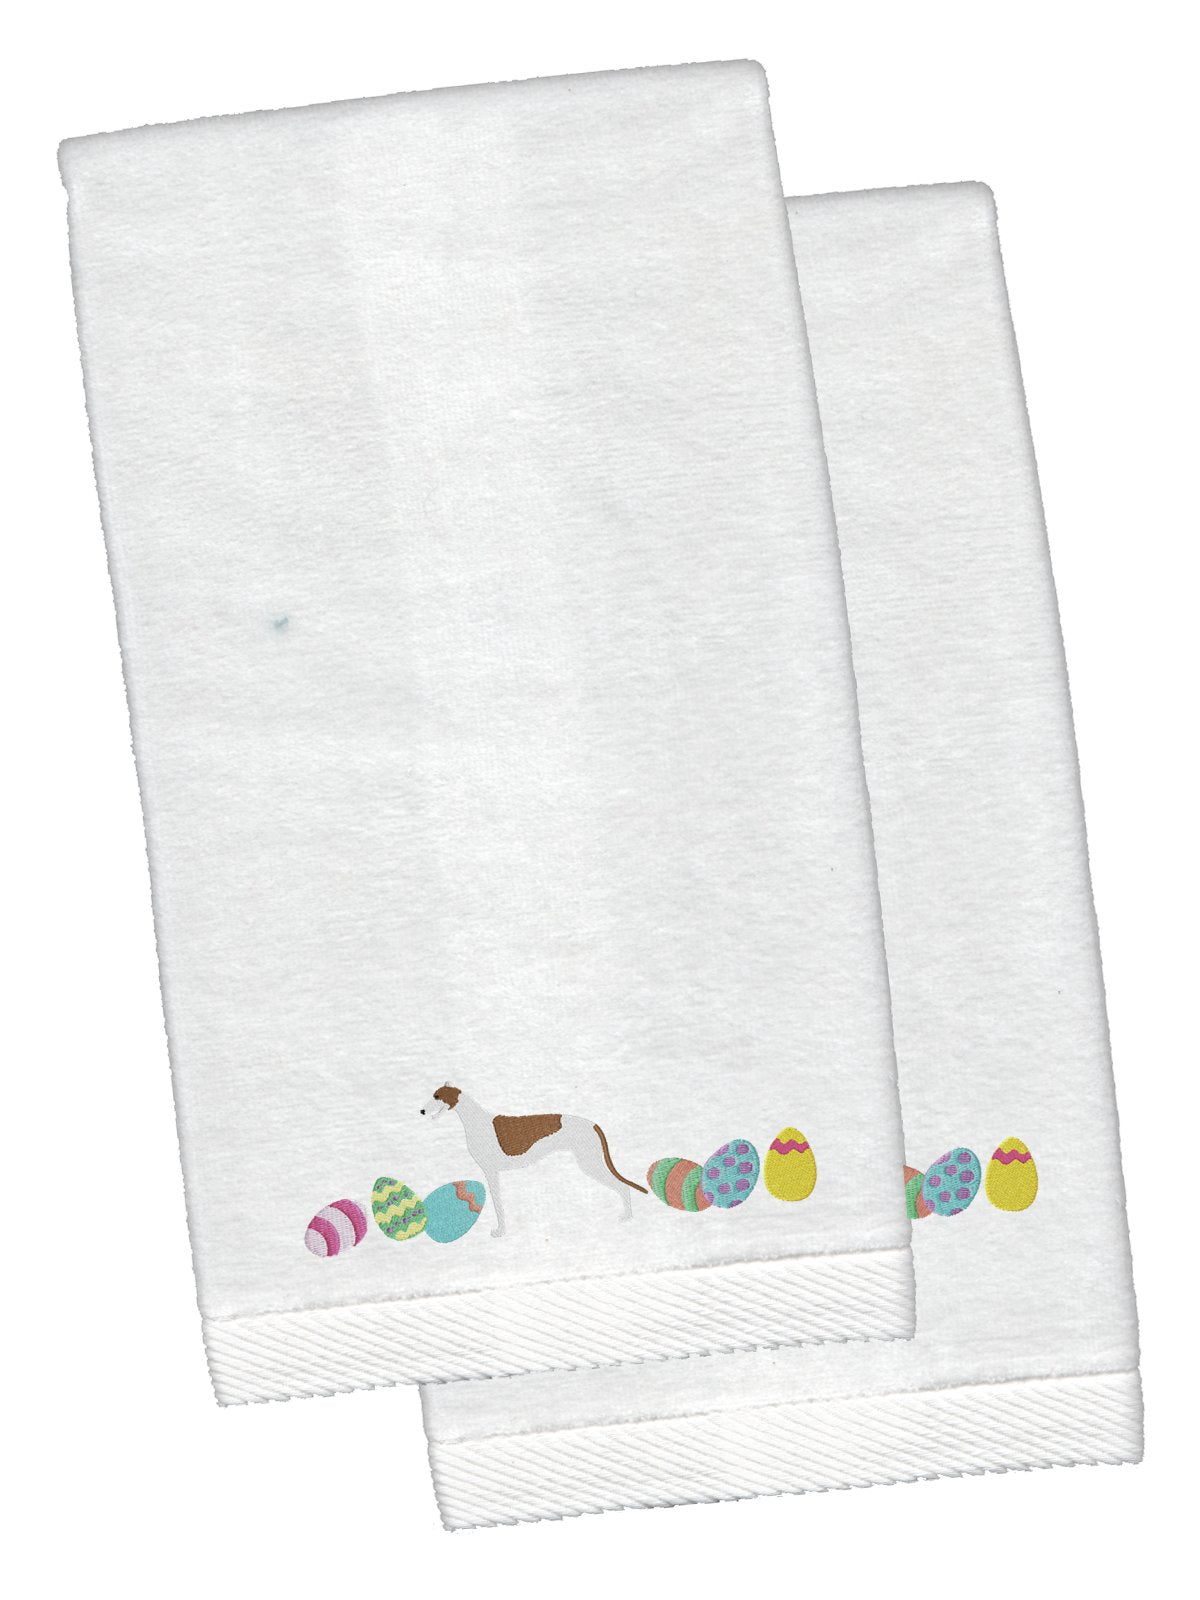 Greyhound Easter White Embroidered Plush Hand Towel Set of 2 CK1651KTEMB by Caroline's Treasures